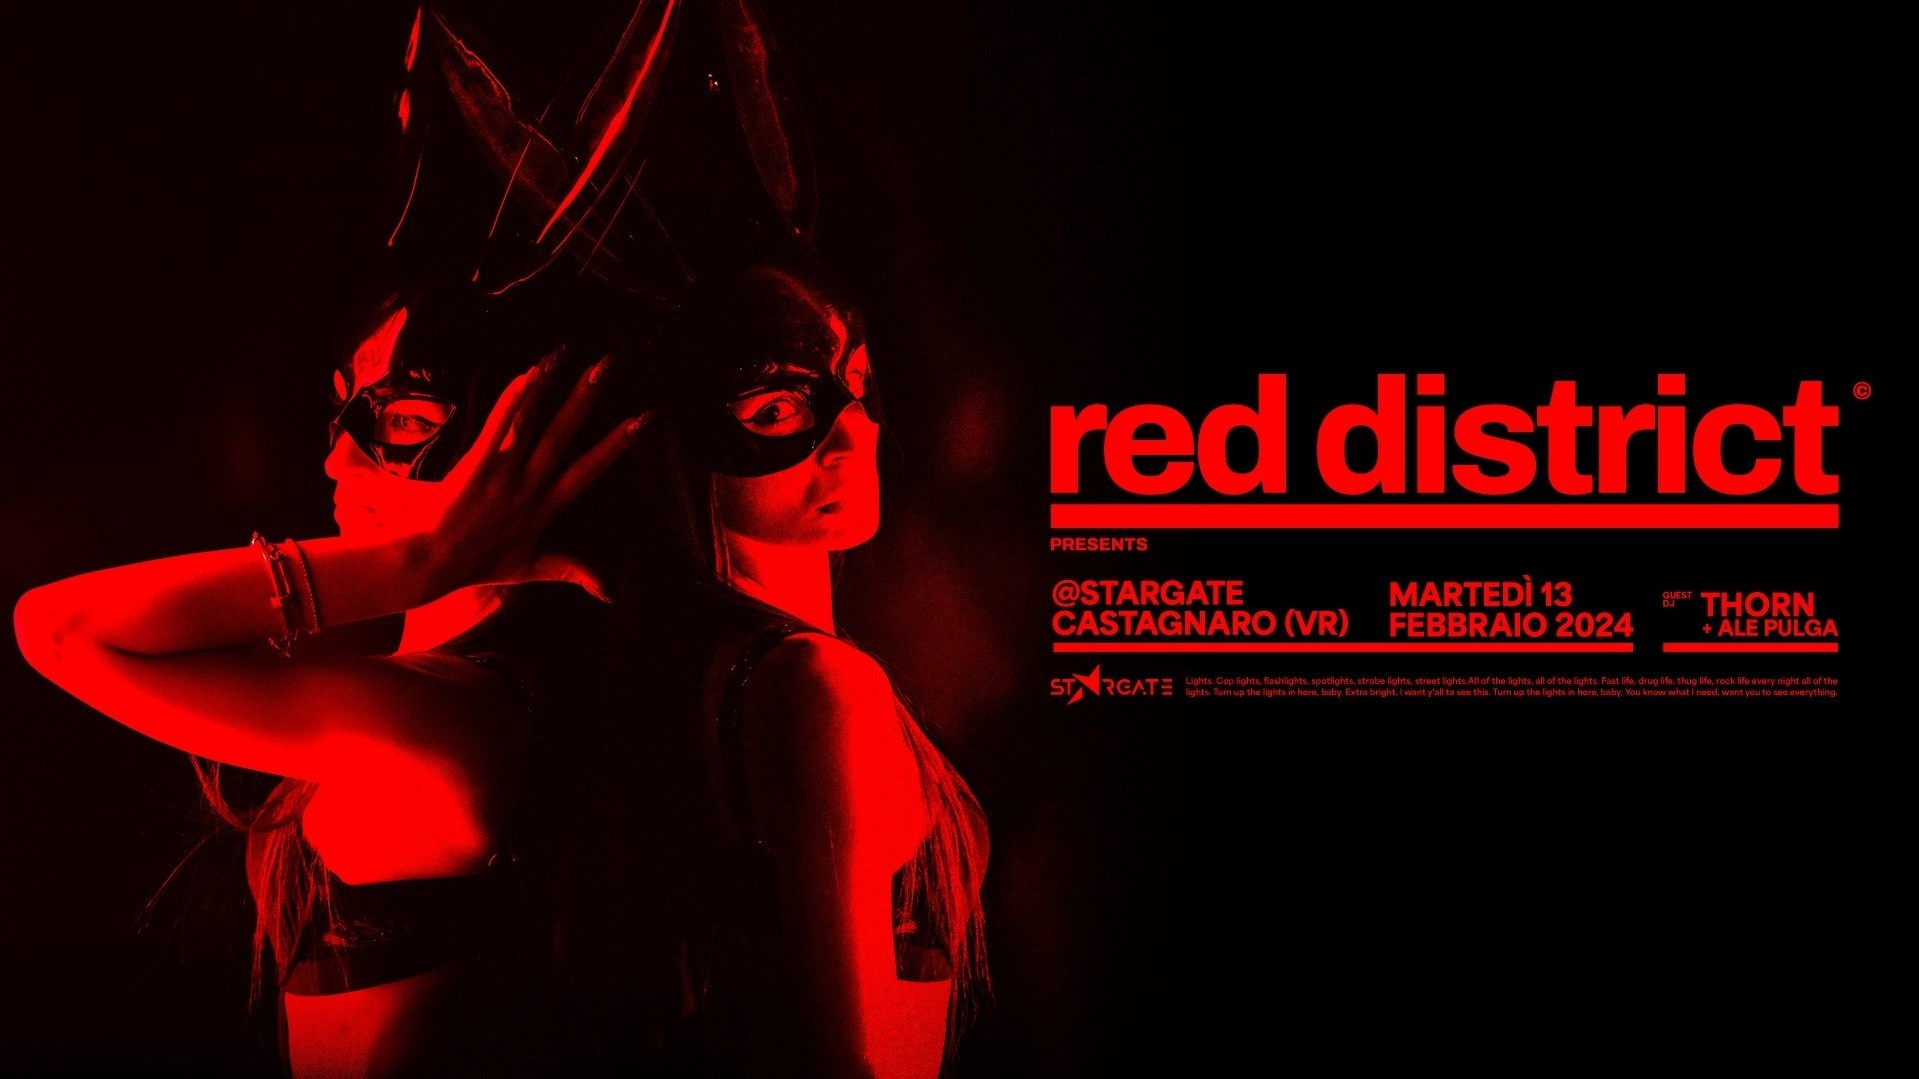 Red District ® w/ Thorn & Ale Pulga